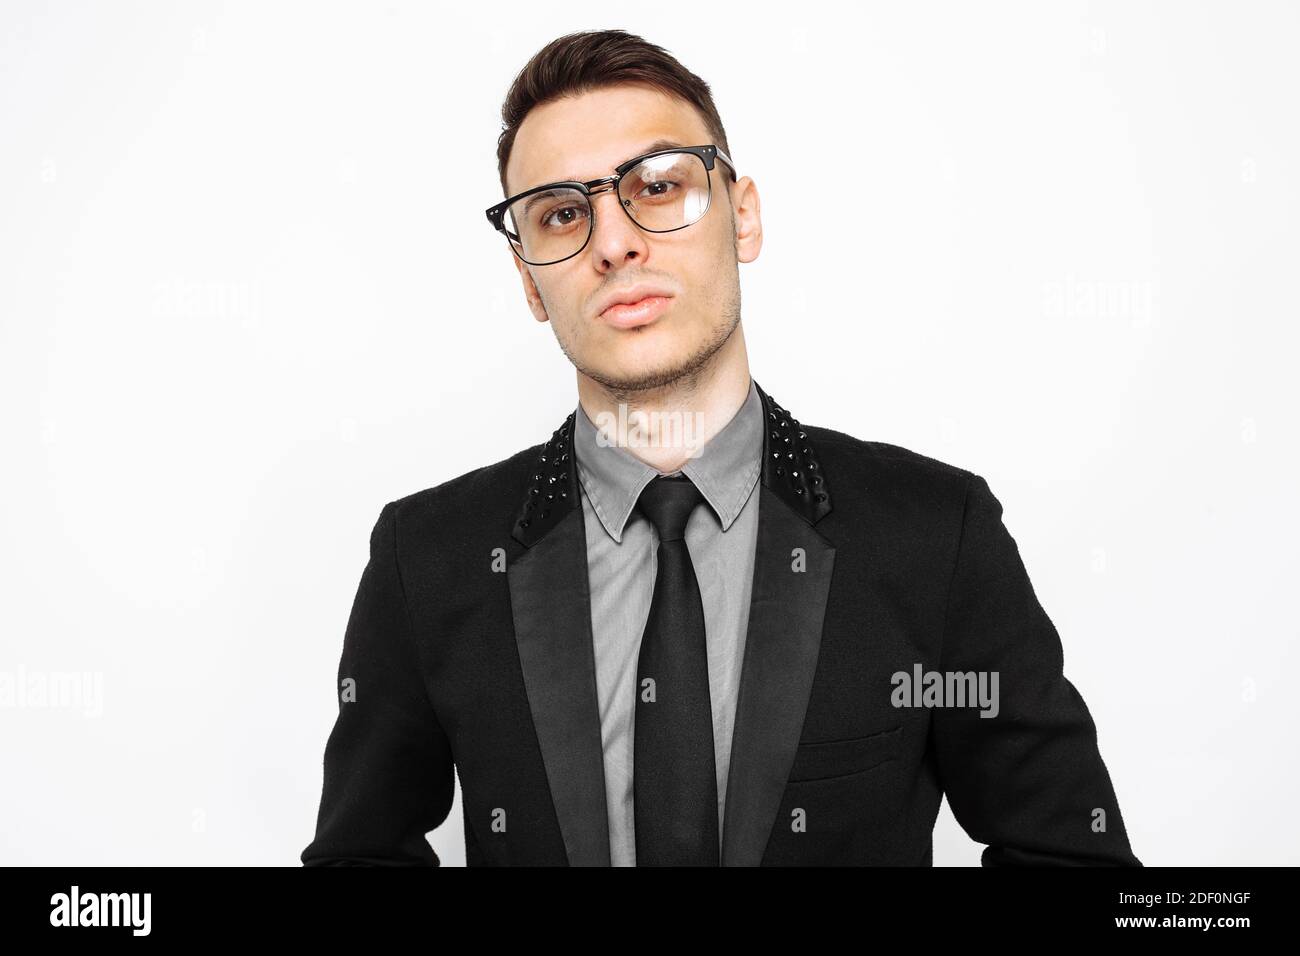 Portrait of a successful man in glasses and a black suit, a businessman posing on a white background Stock Photo